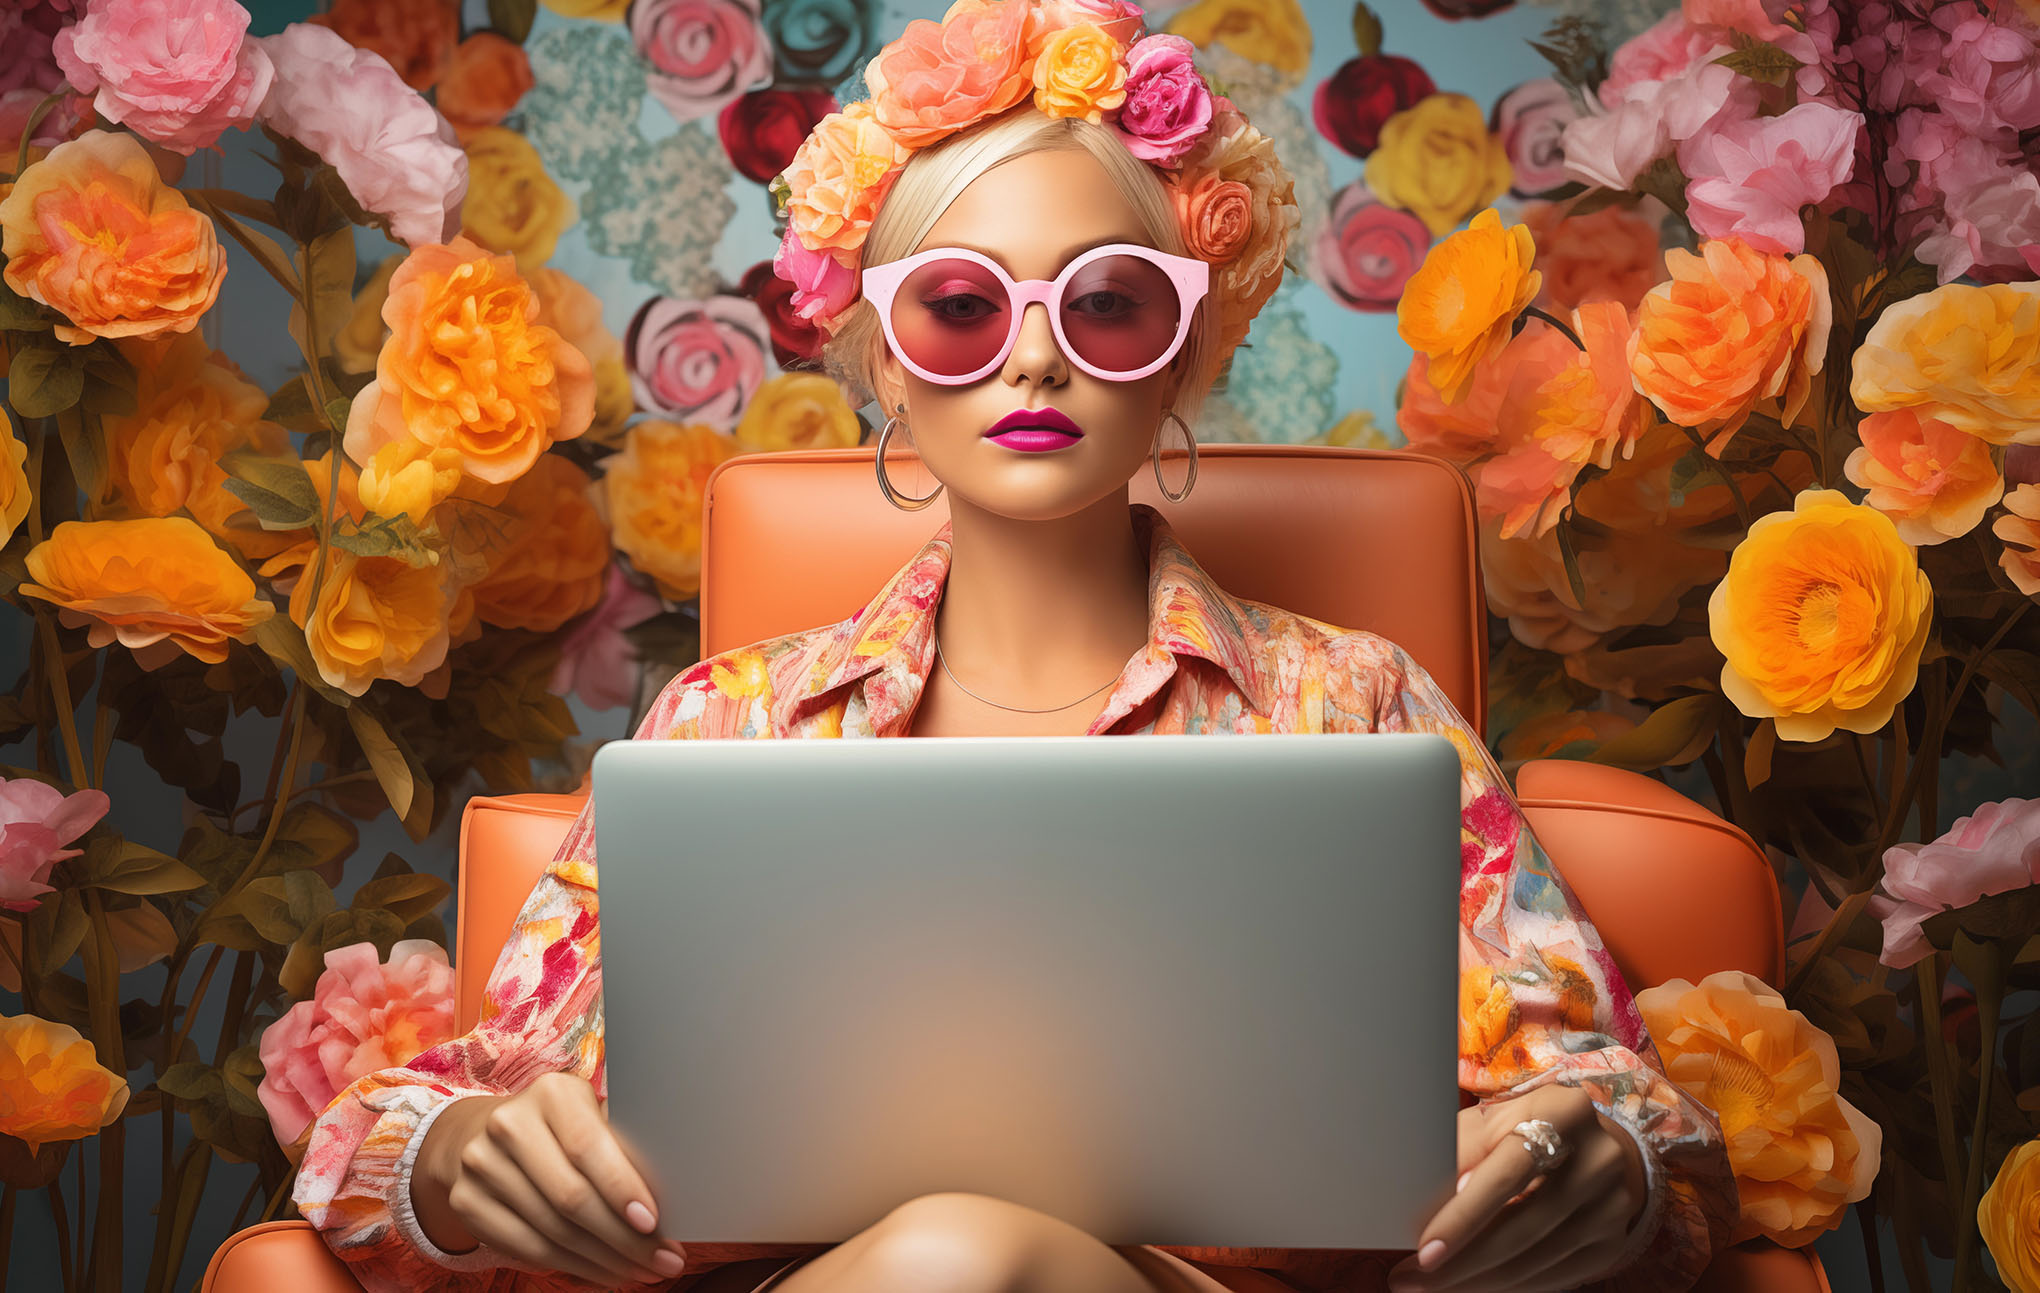 A woman with a floral headband and pink sunglasses sits in a leather chair, using a laptop. she wears a colorful floral shirt, against a backdrop of vibrant roses in shades of orange and pink.